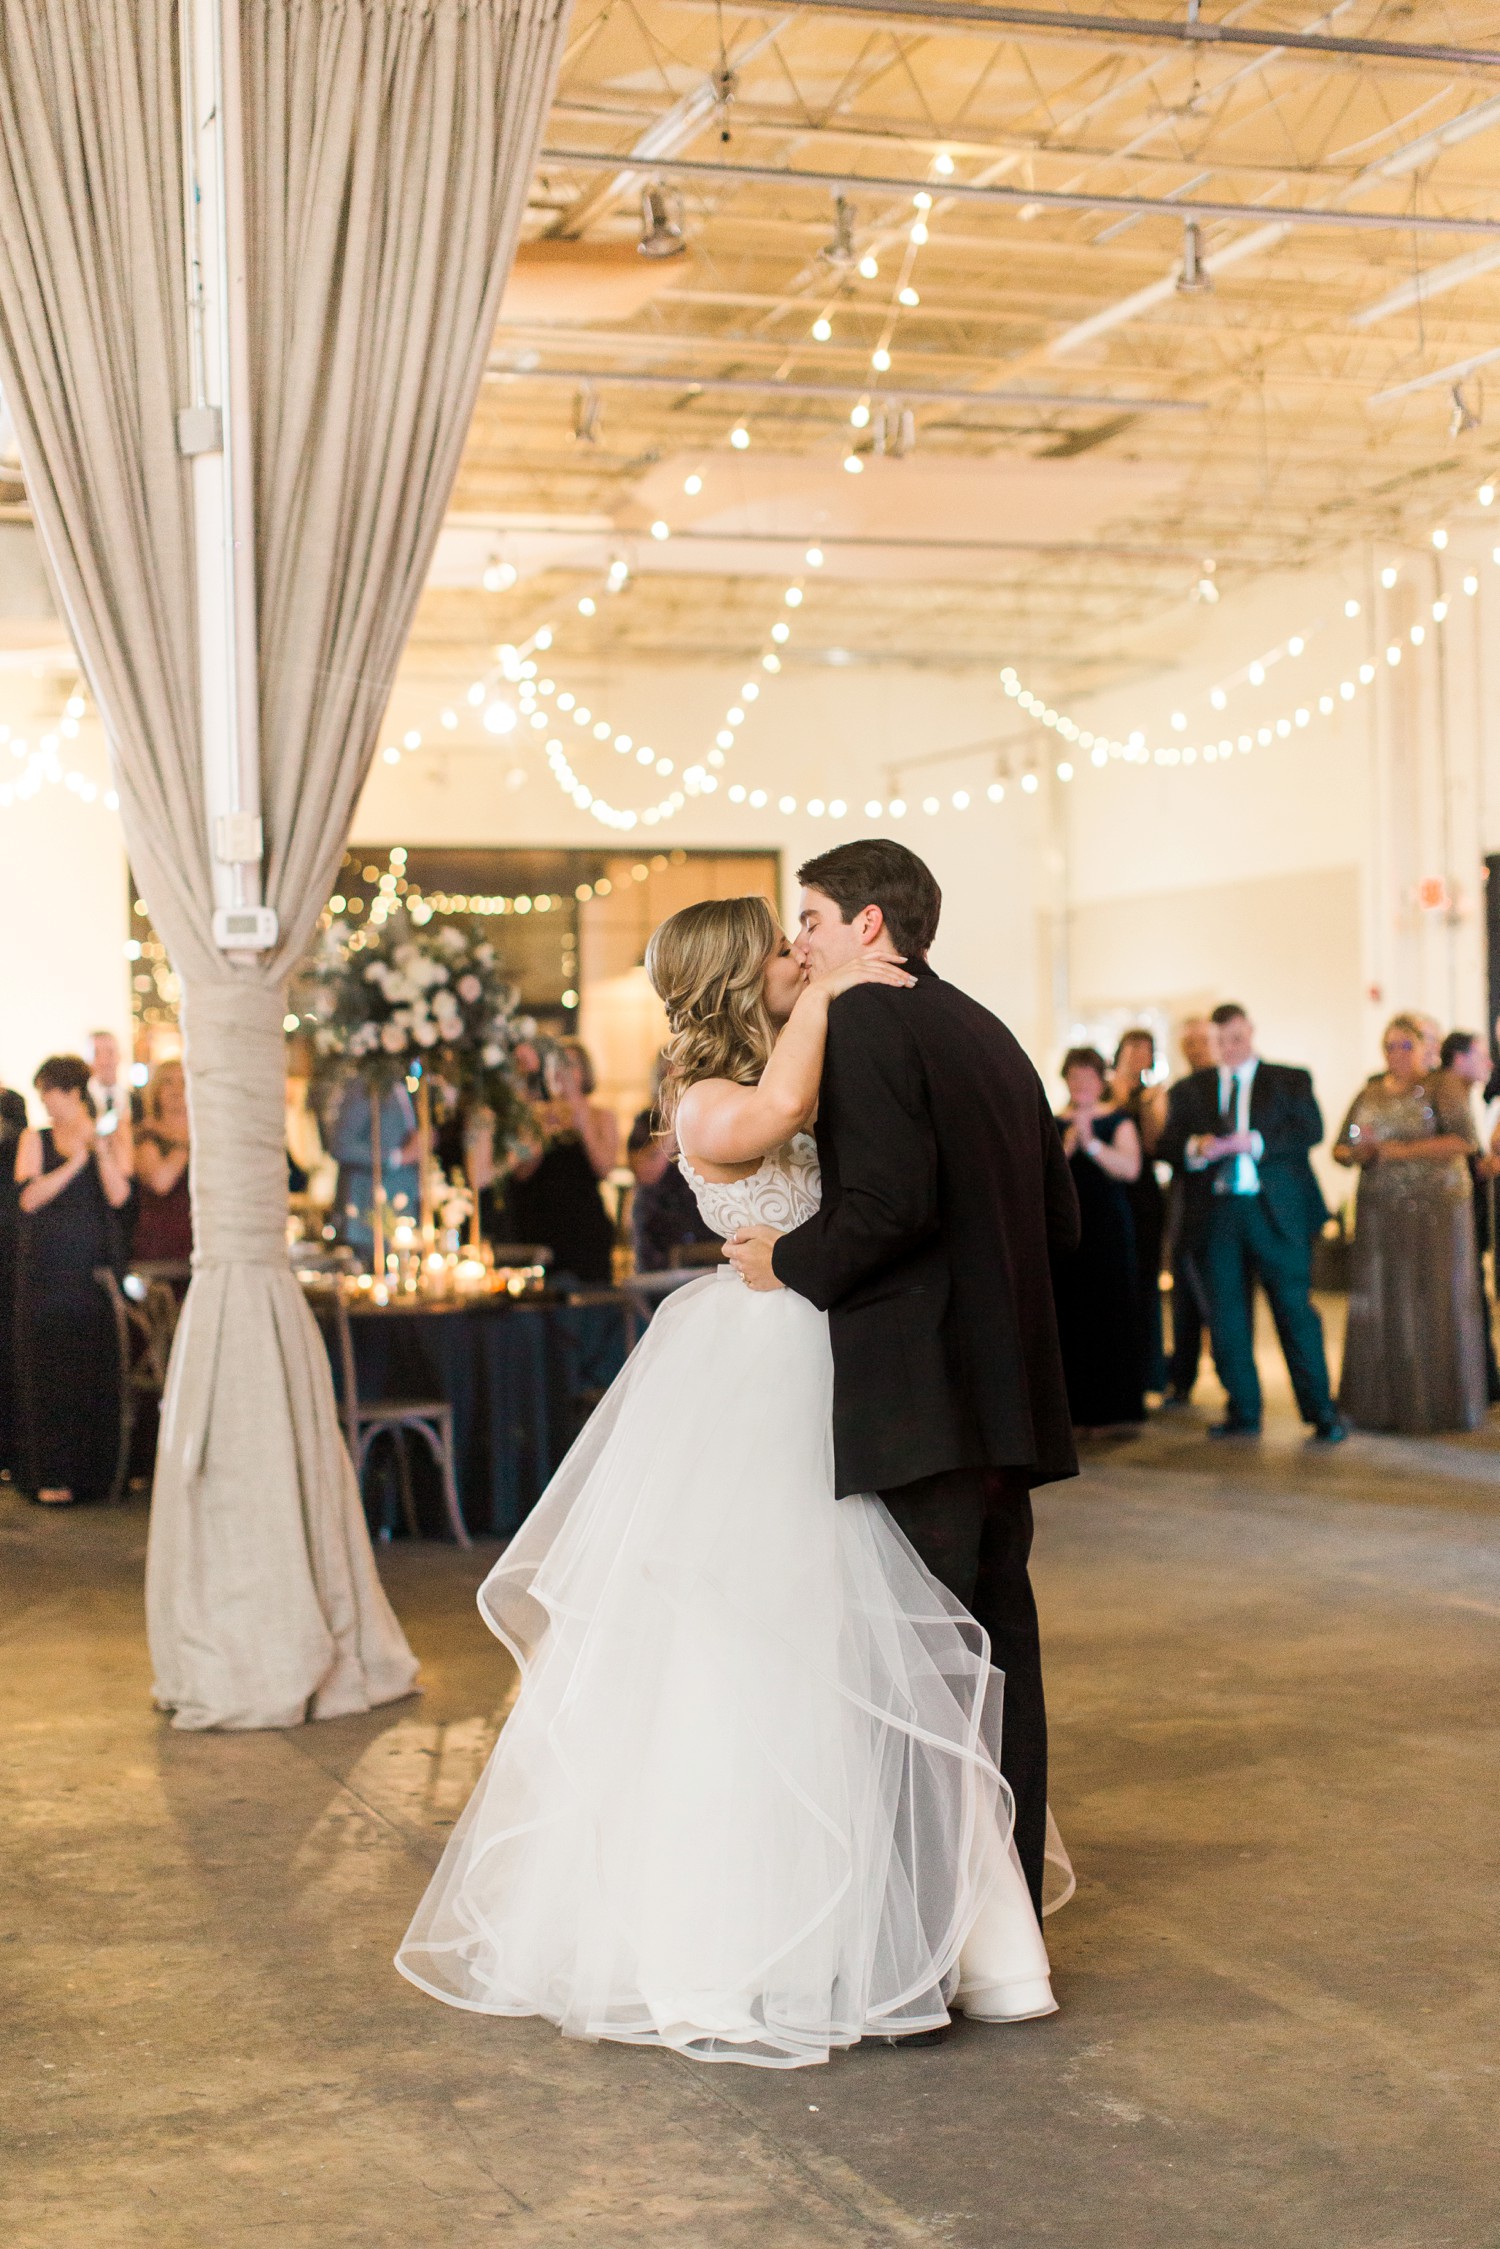 First Dance at the Stave Room in Atlanta